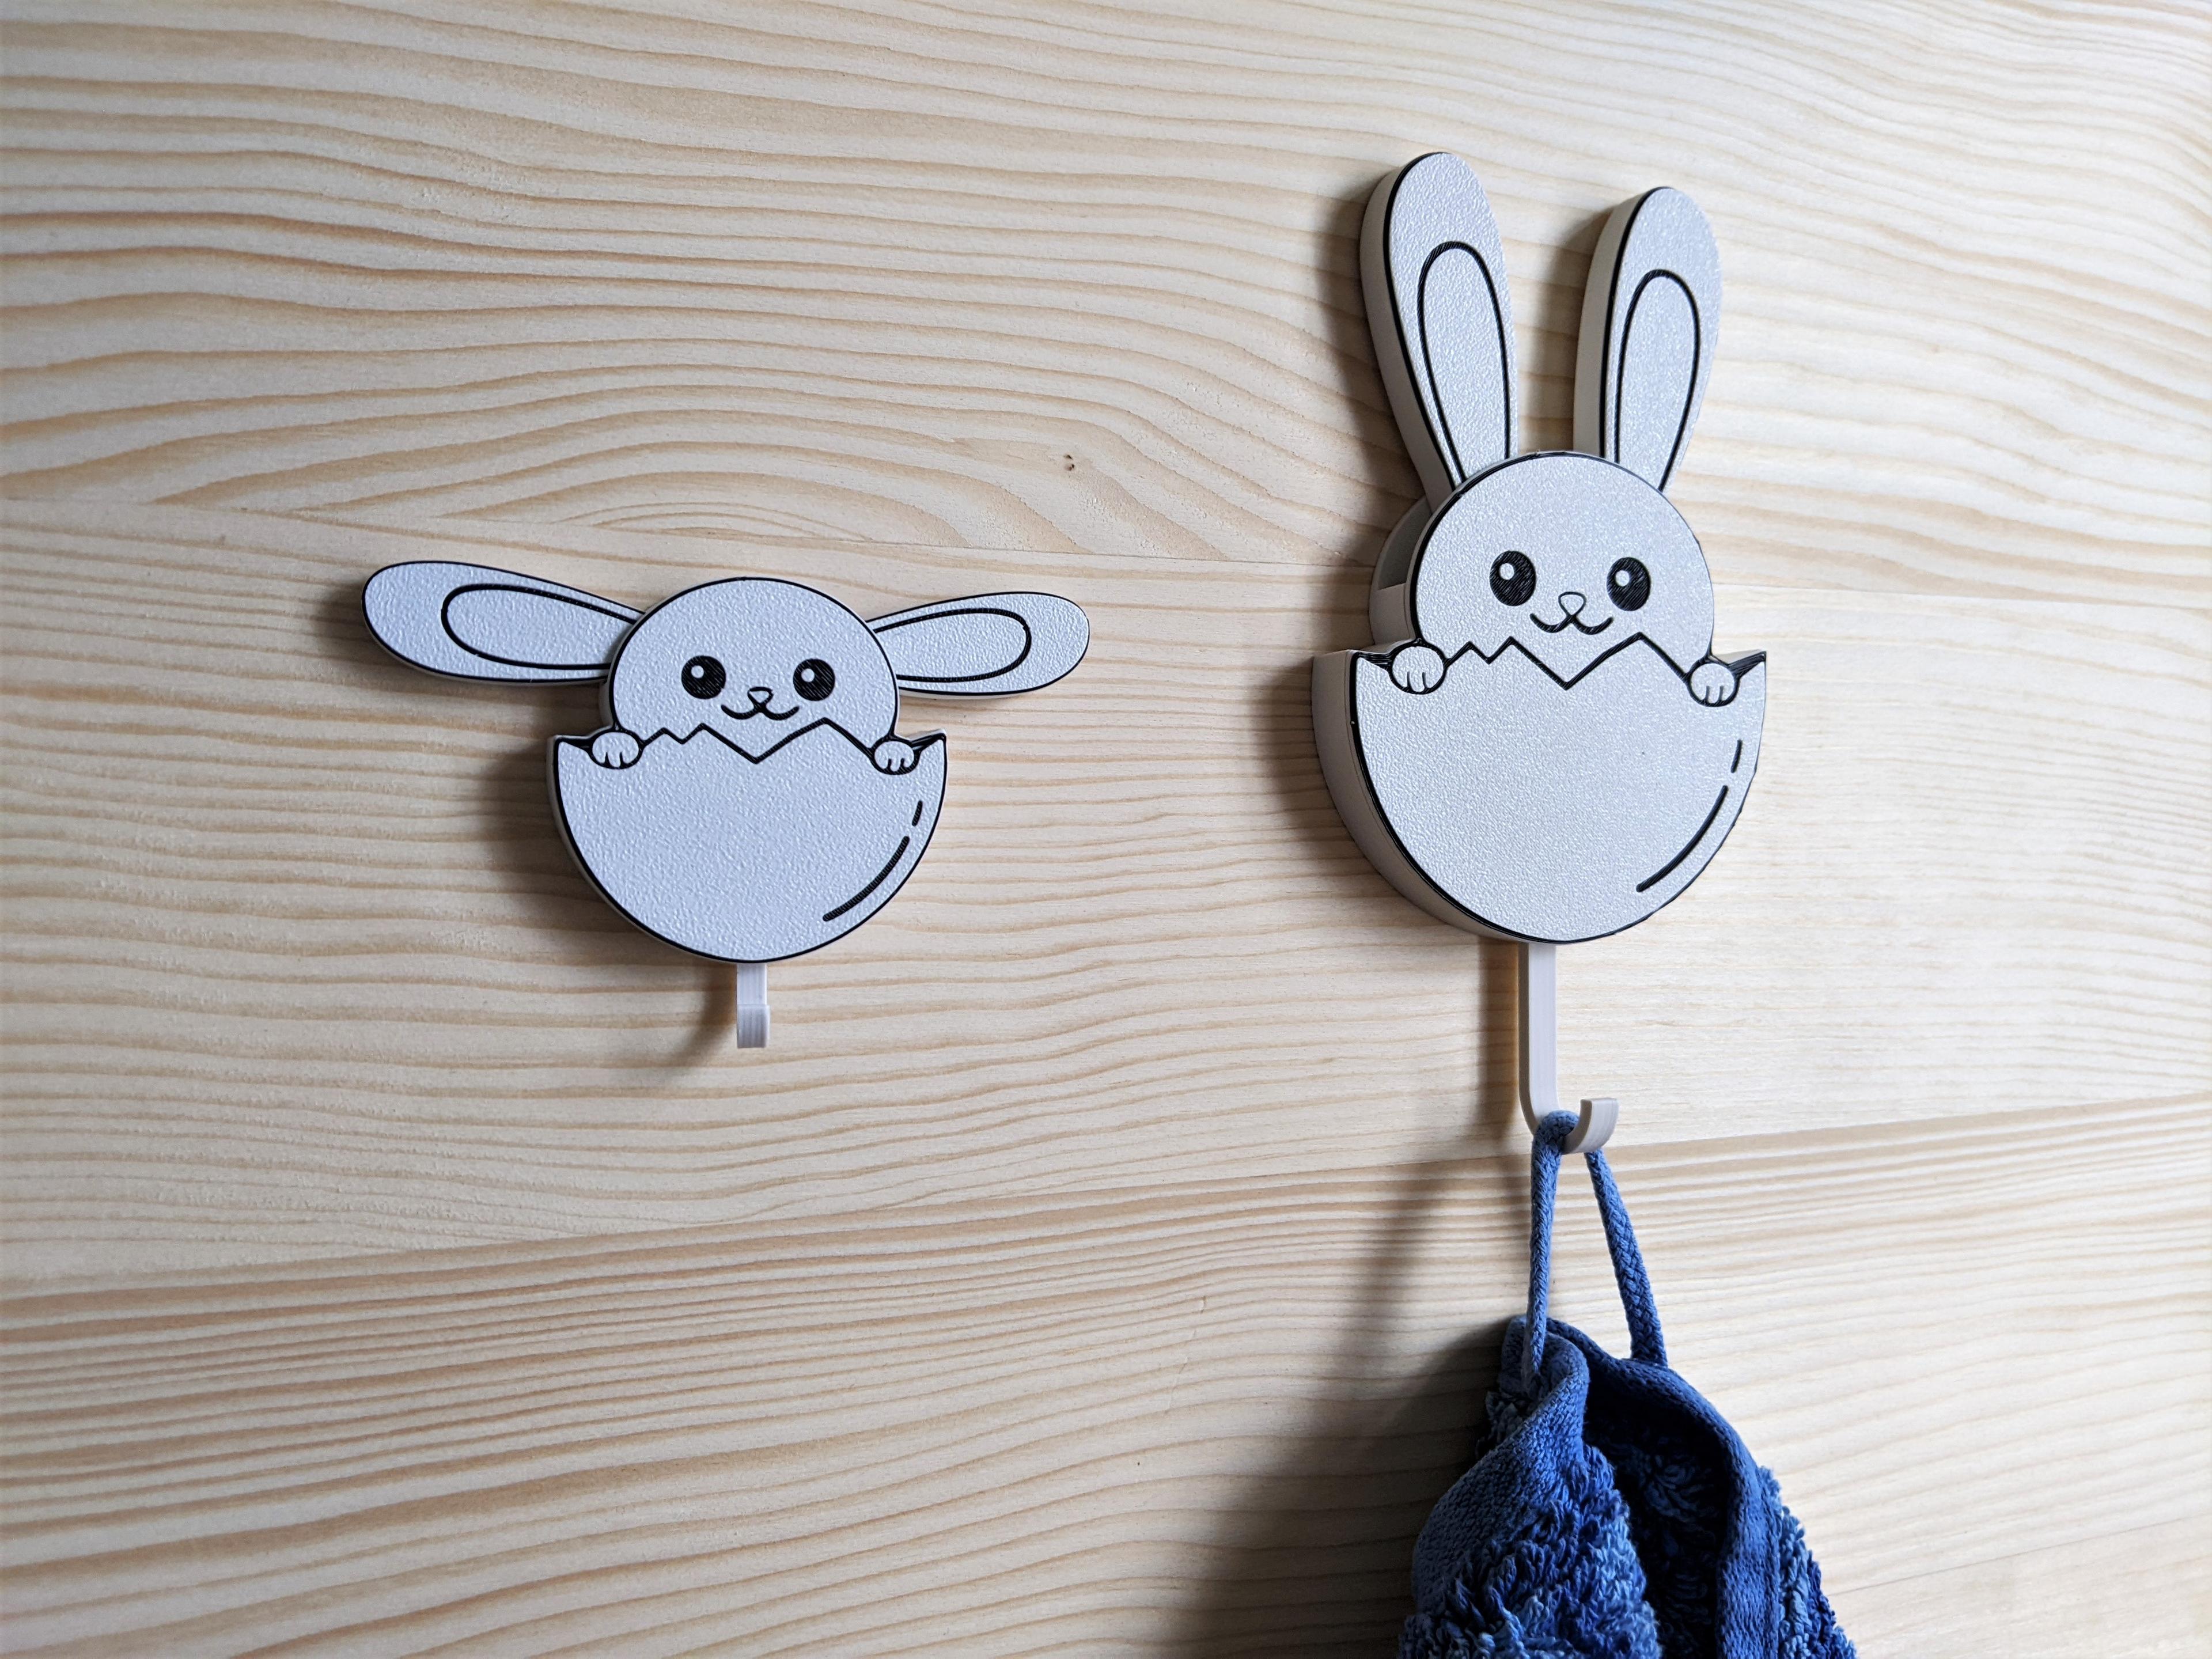 WALL KEY HOLDER BUNNY - funny and cute bunny key hanger and organizer 3d model